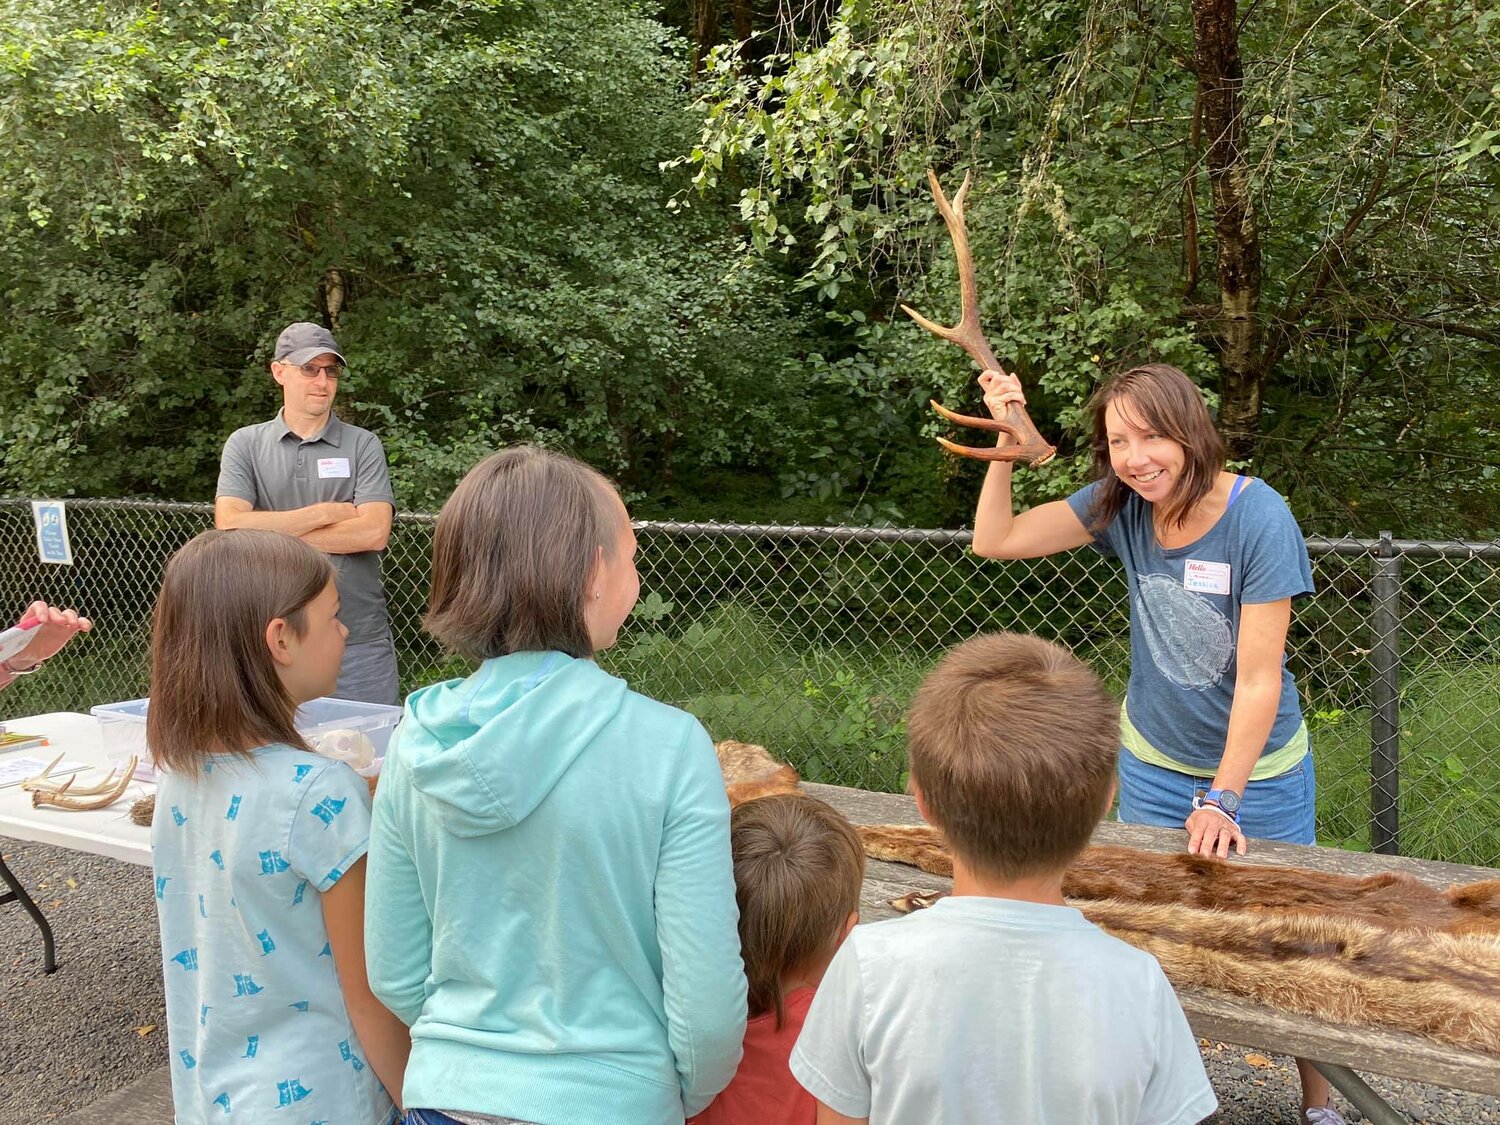 Jessica Homyack, a local wildlife biologist pictured in this photo provided by Friends of the Seminary Hill Natural Area, will be doing a kid-friendly presentation about wildlife that can be found in the natural area.